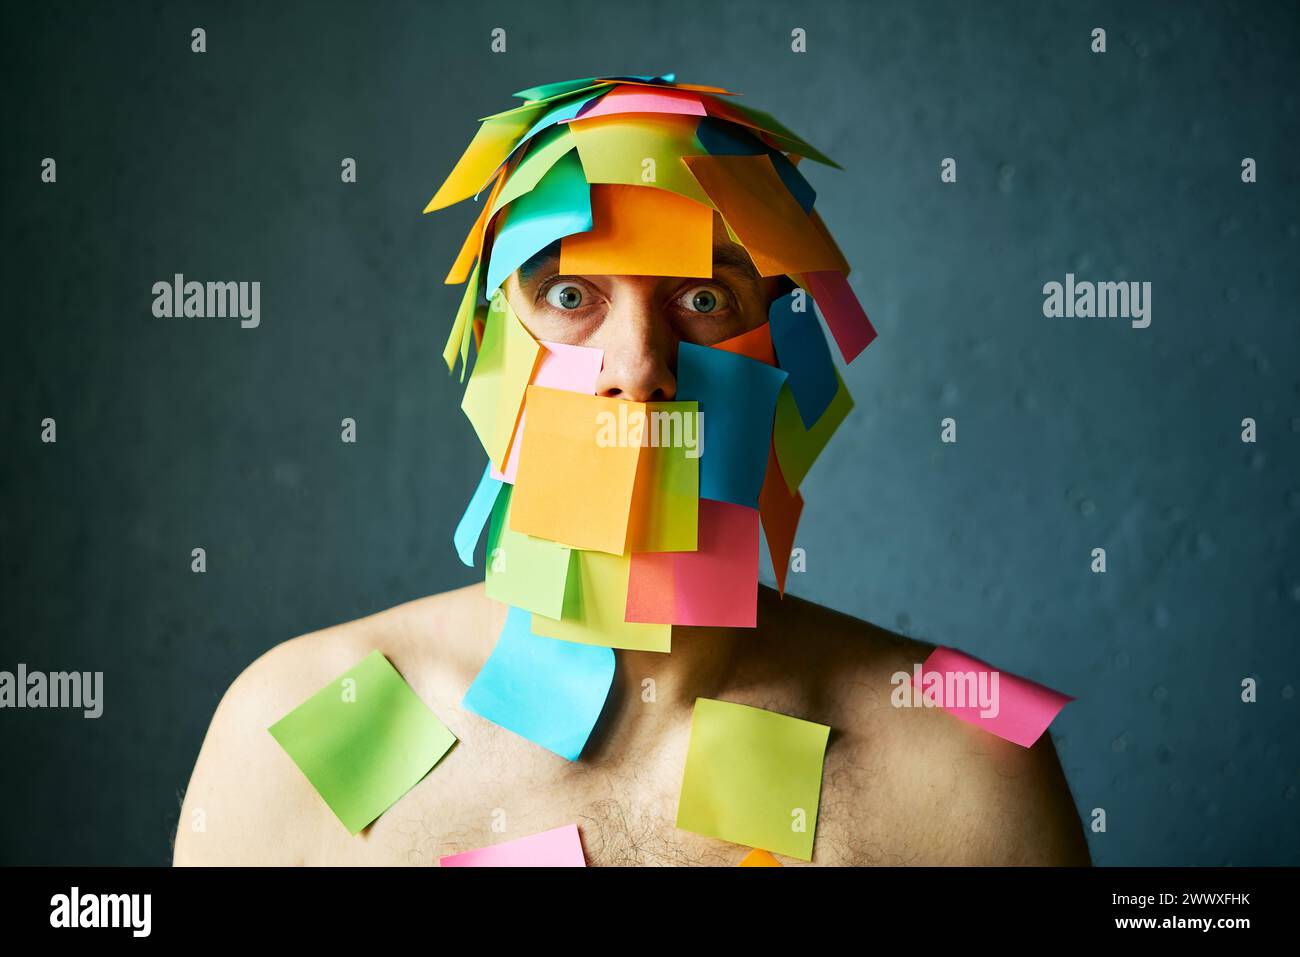 Shocked amazed man with colorful sticky notes all over his face and body over gray background Stock Photo